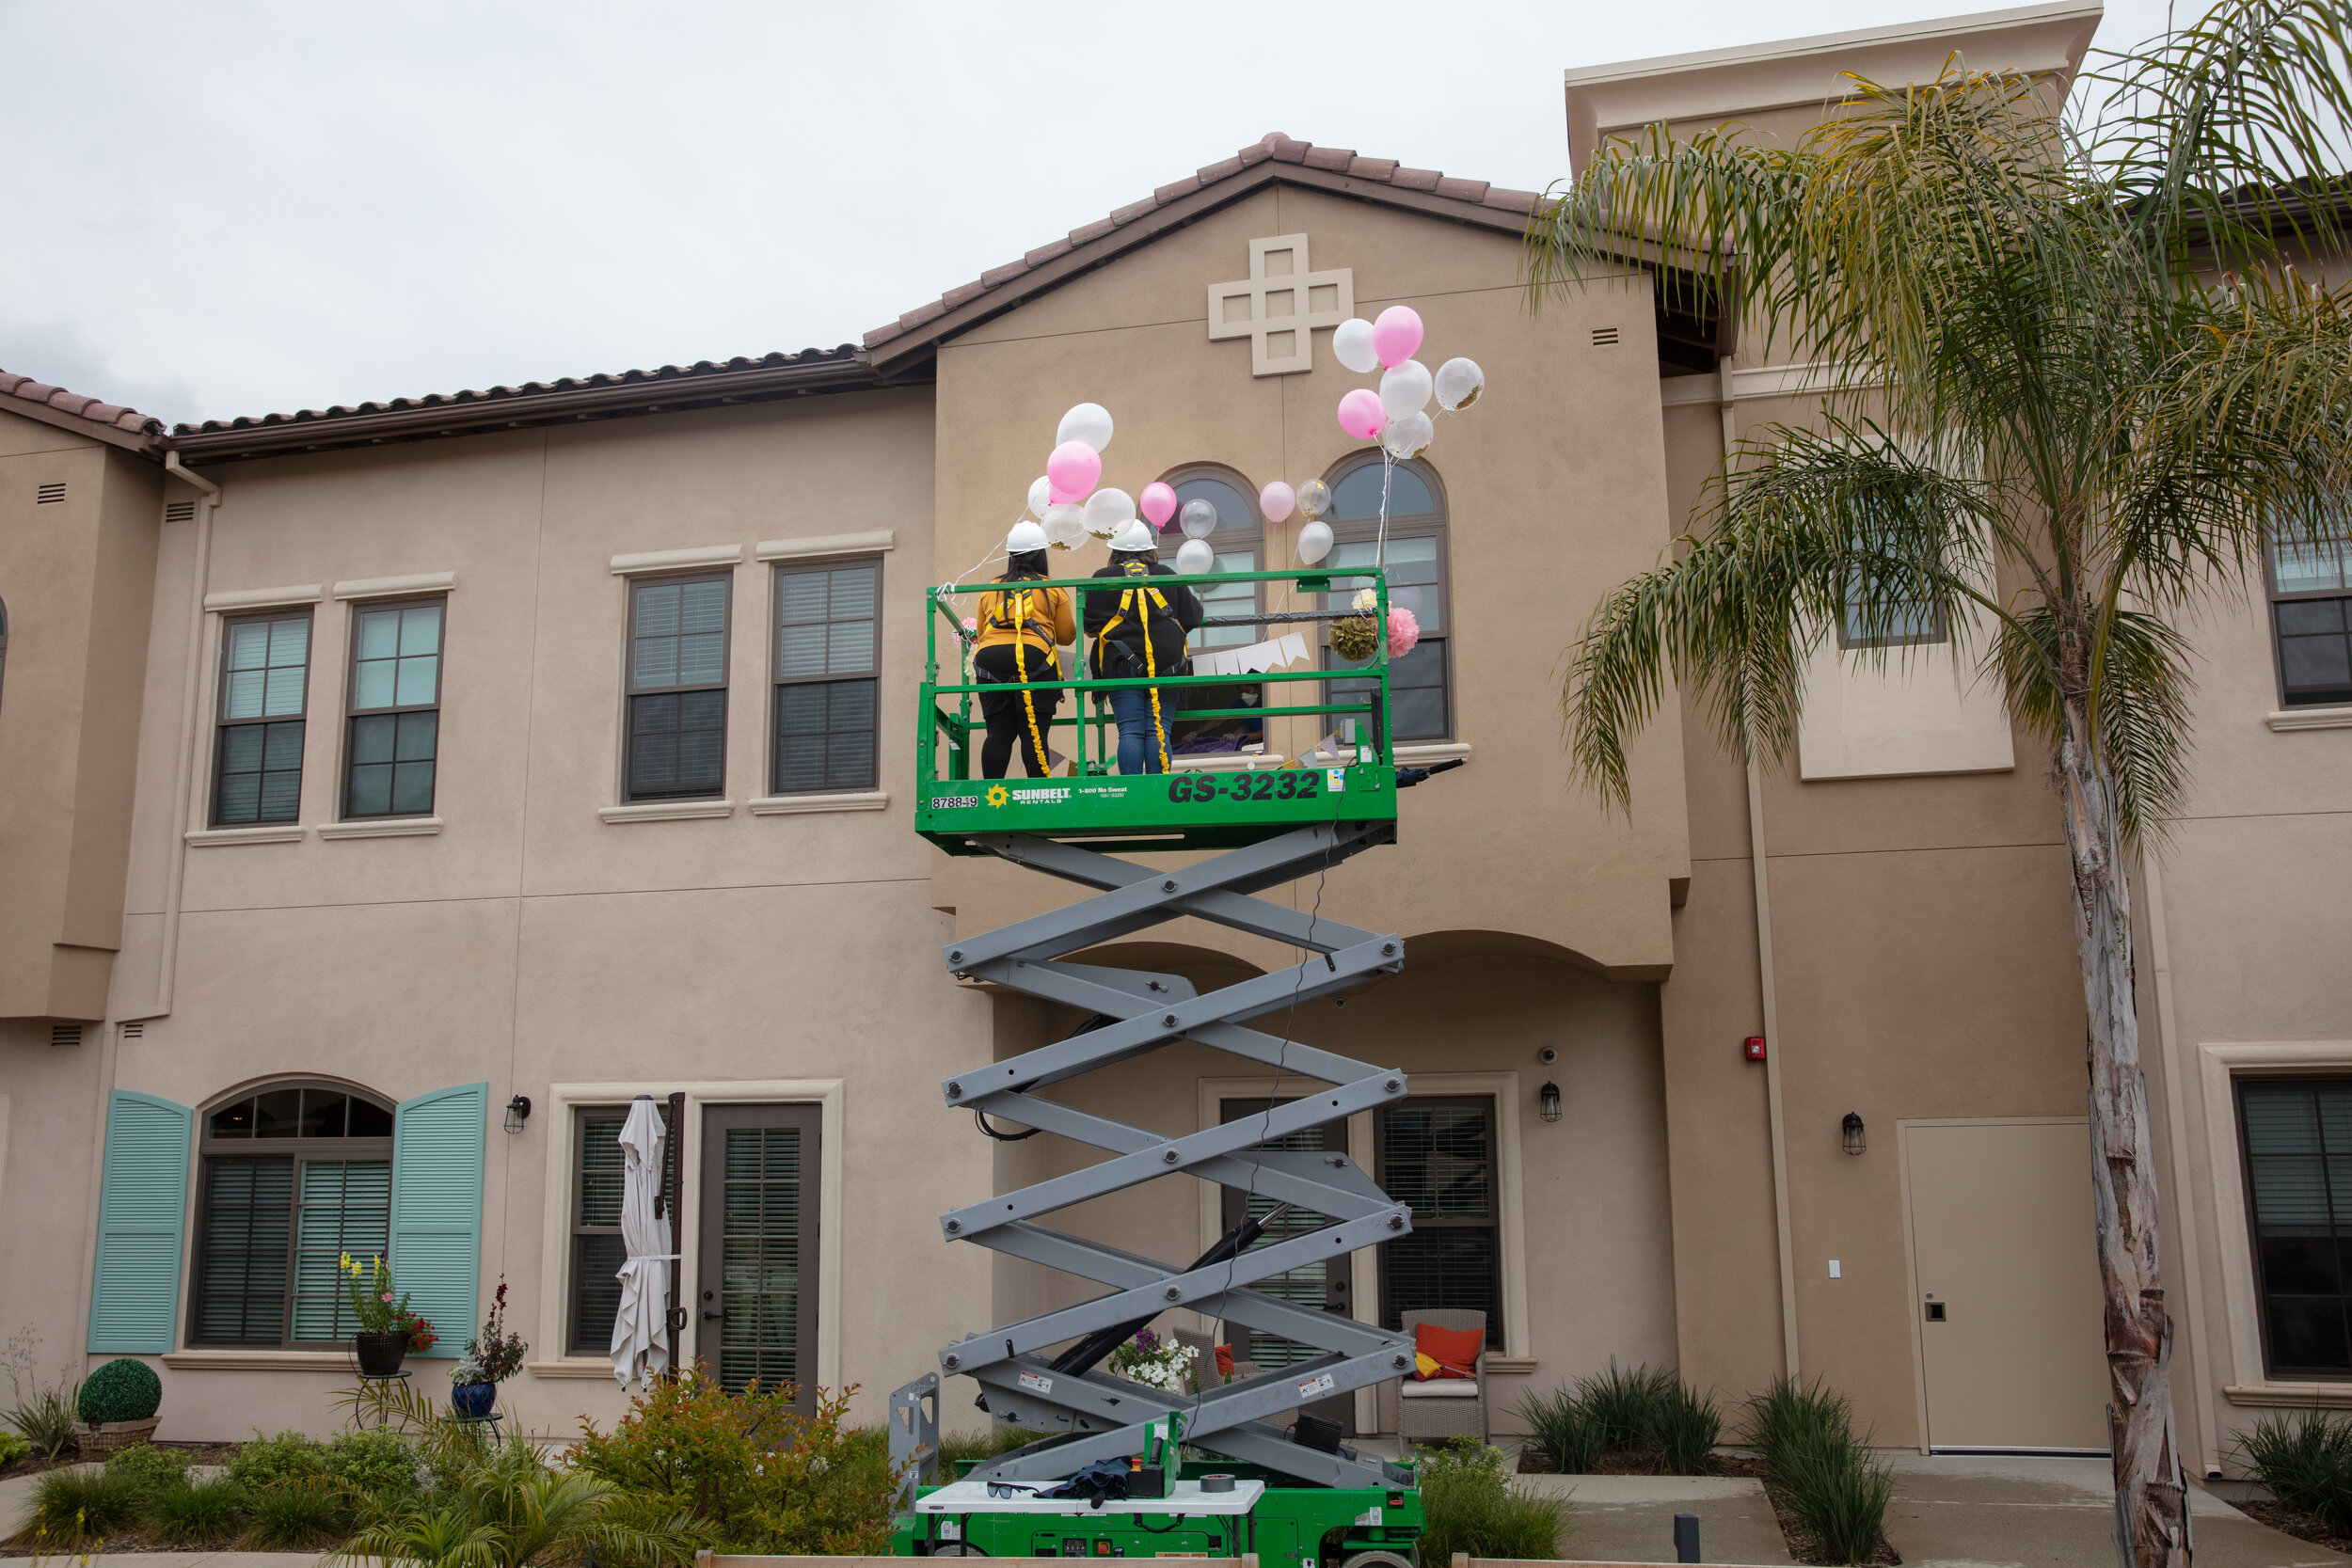  Lucy Cavazos and her daughter Amber, from Huntington Park, use a lift to help celebrate the 91st birthday of Margaret Jones, in the courtyard assisted living facility, The Kensington Redondo Beach, in Redondo Beach, CA, during the coronavirus pandem